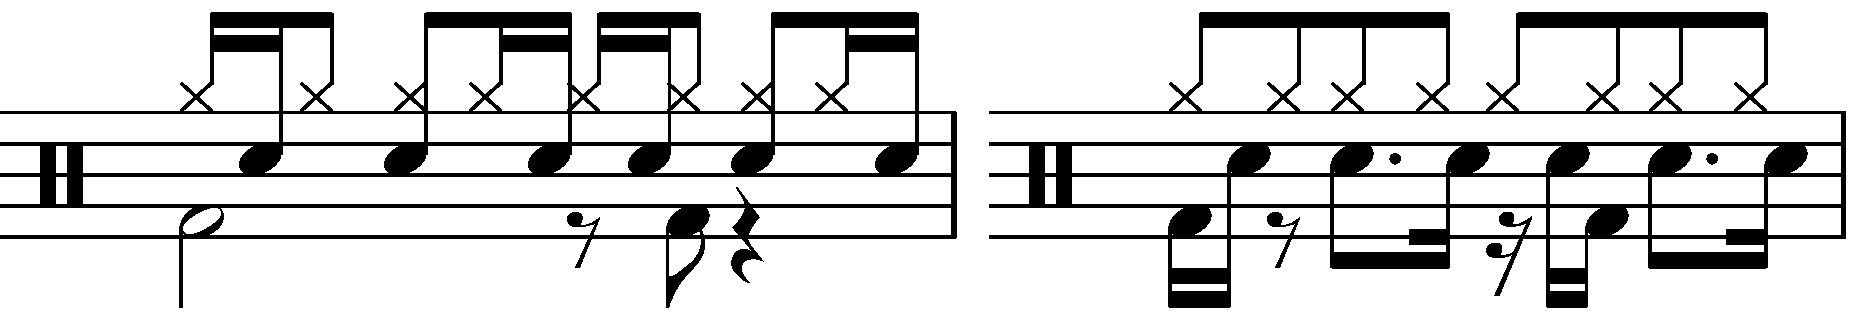 Different forms of notation